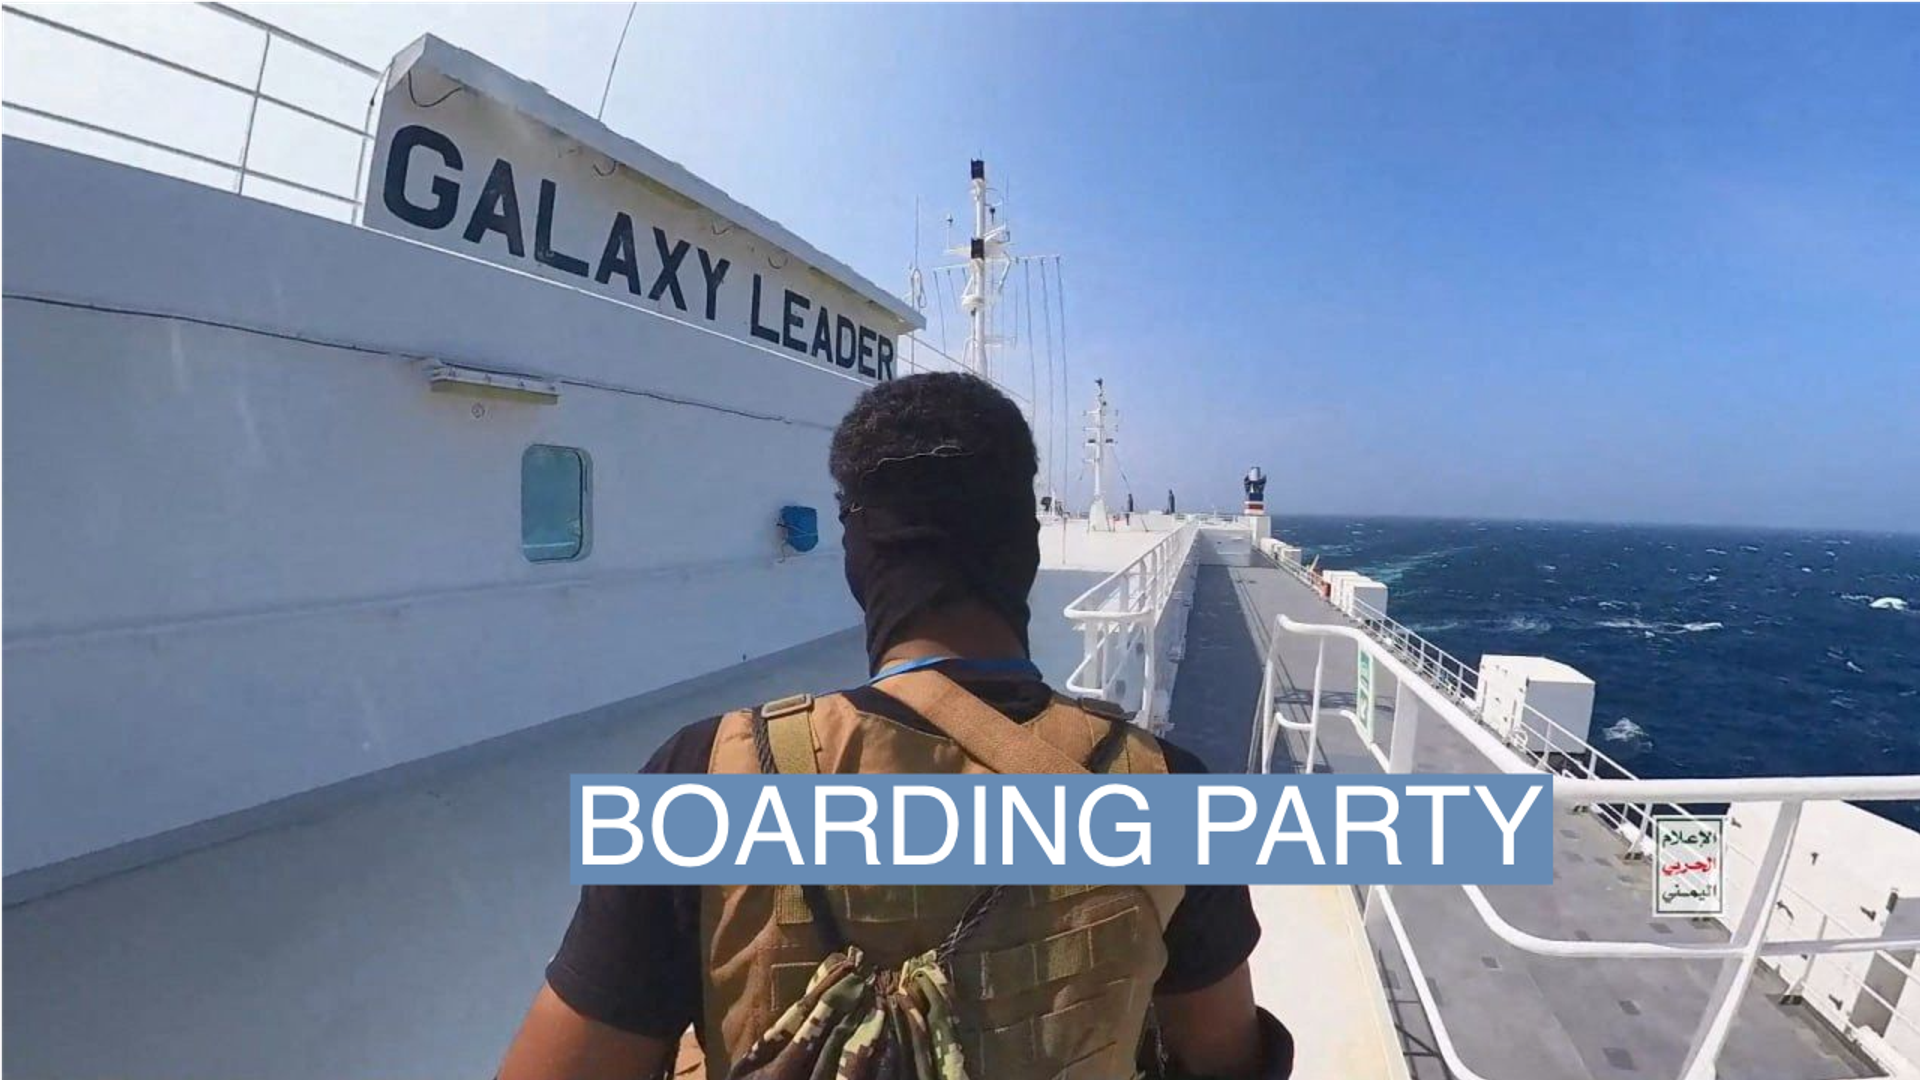 A Houthi fighter on a cargo ship in the Red Sea.